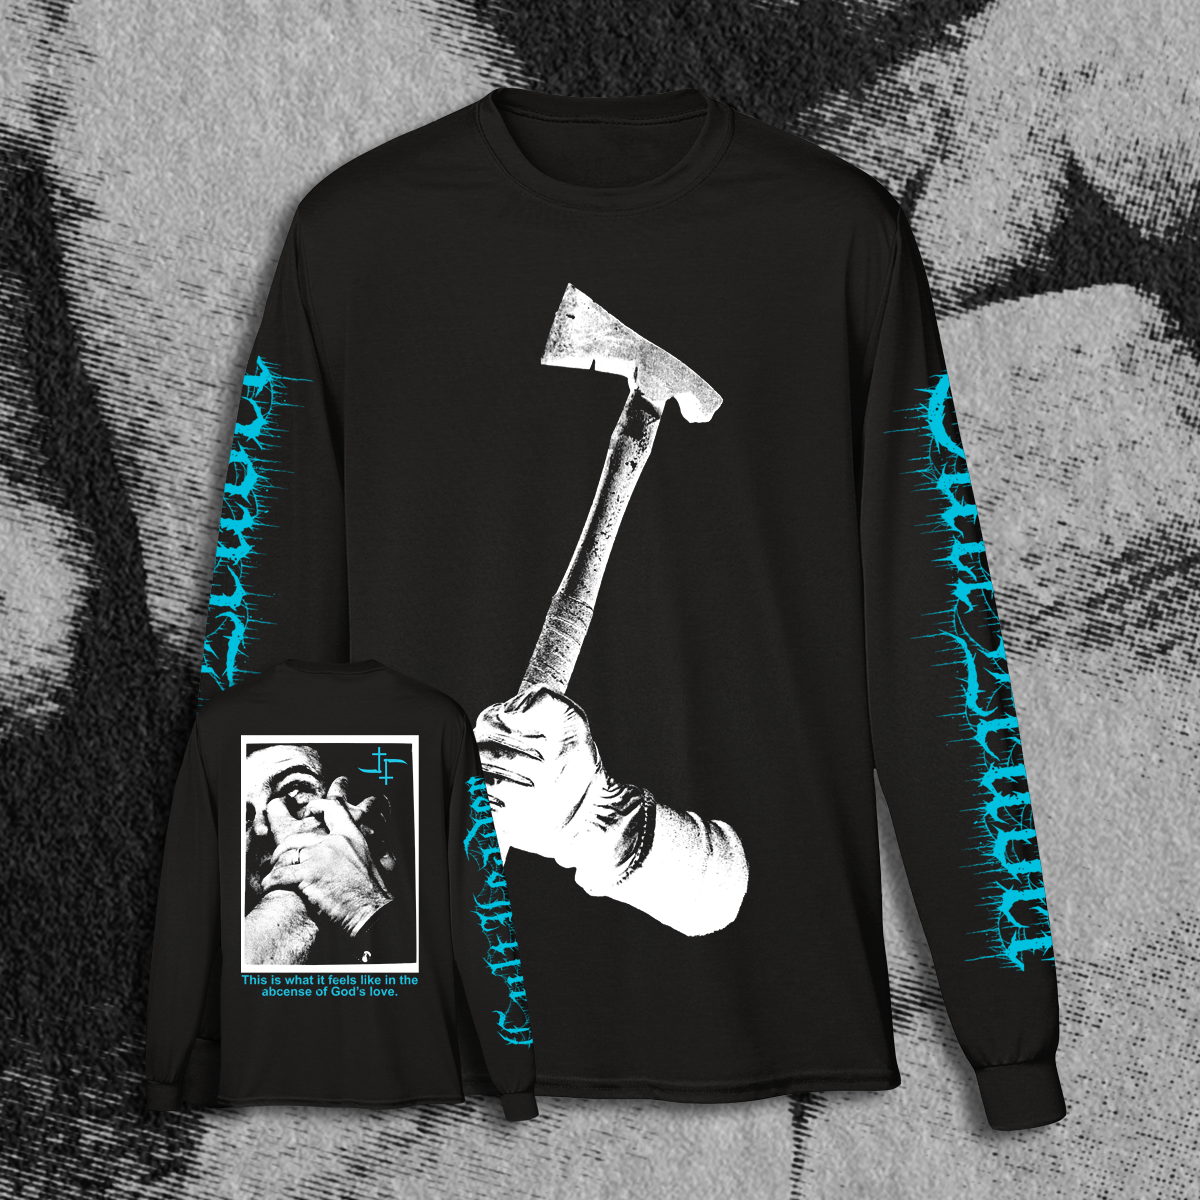 CULT LEADER "THIS IS WHAT IT FEELS LIKE" LONG SLEEVE SHIRT (PRE-ORDER)